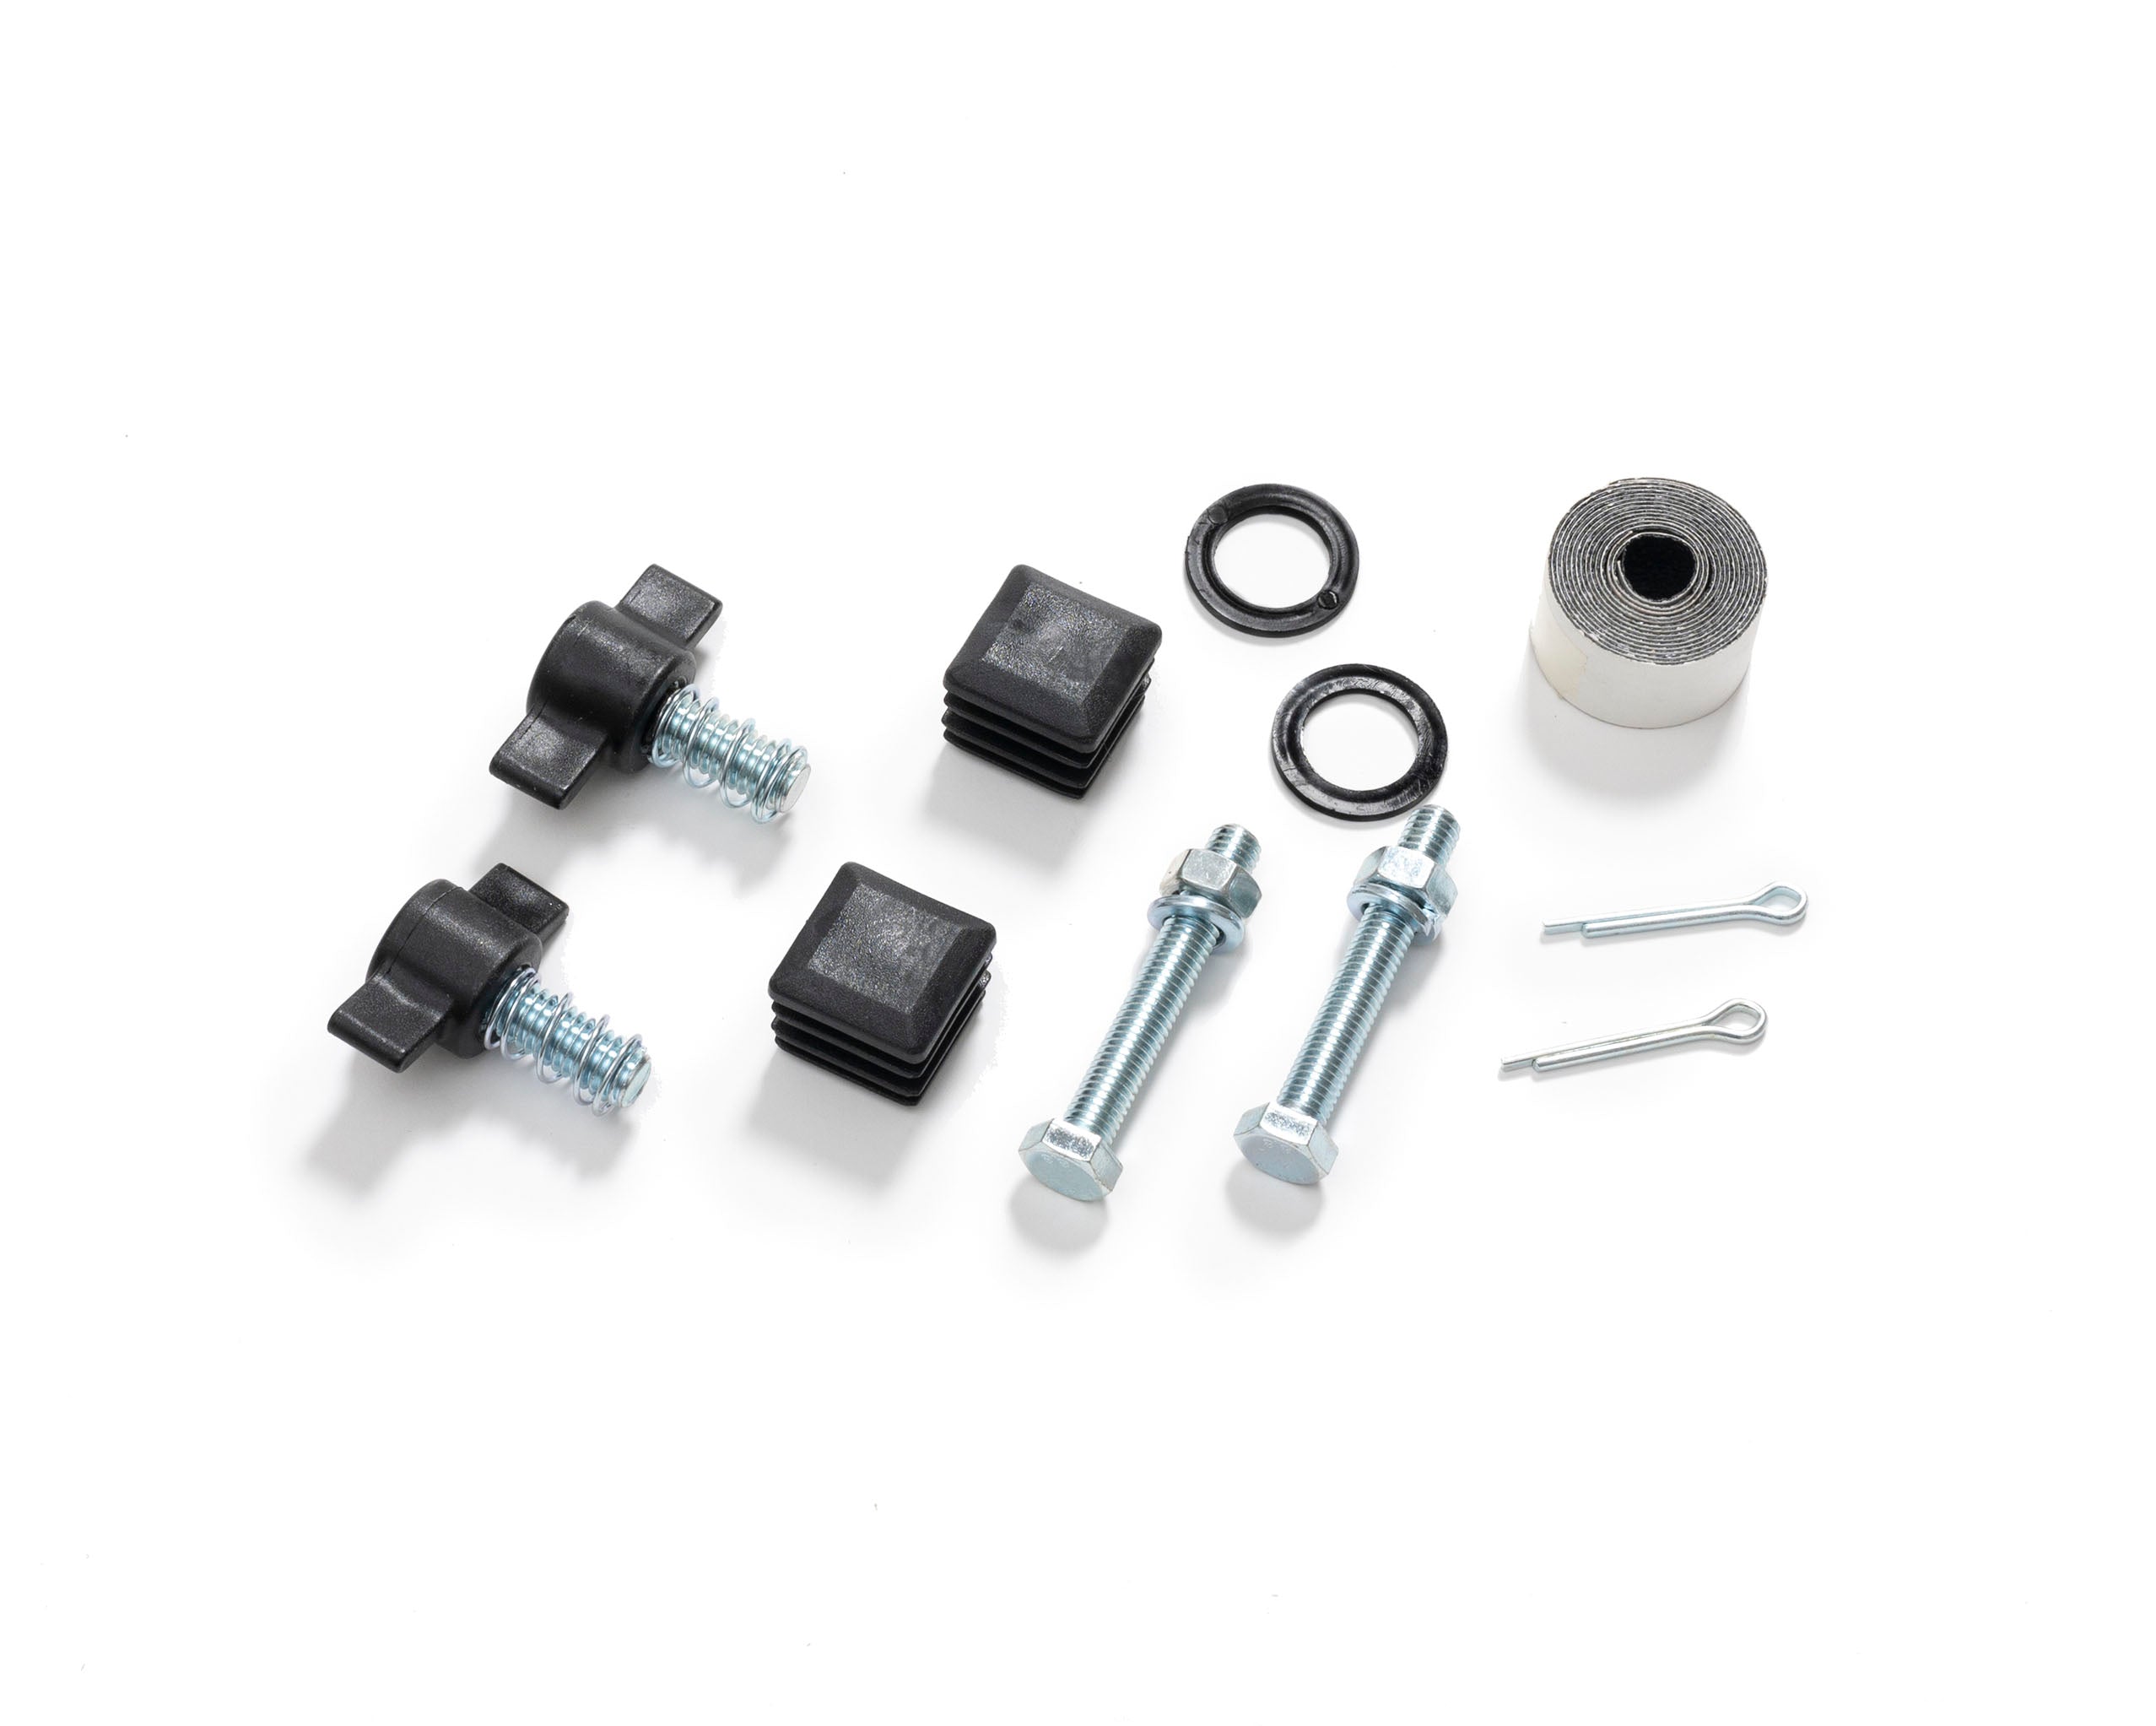 RMH1PACK Replacement Parts Kit